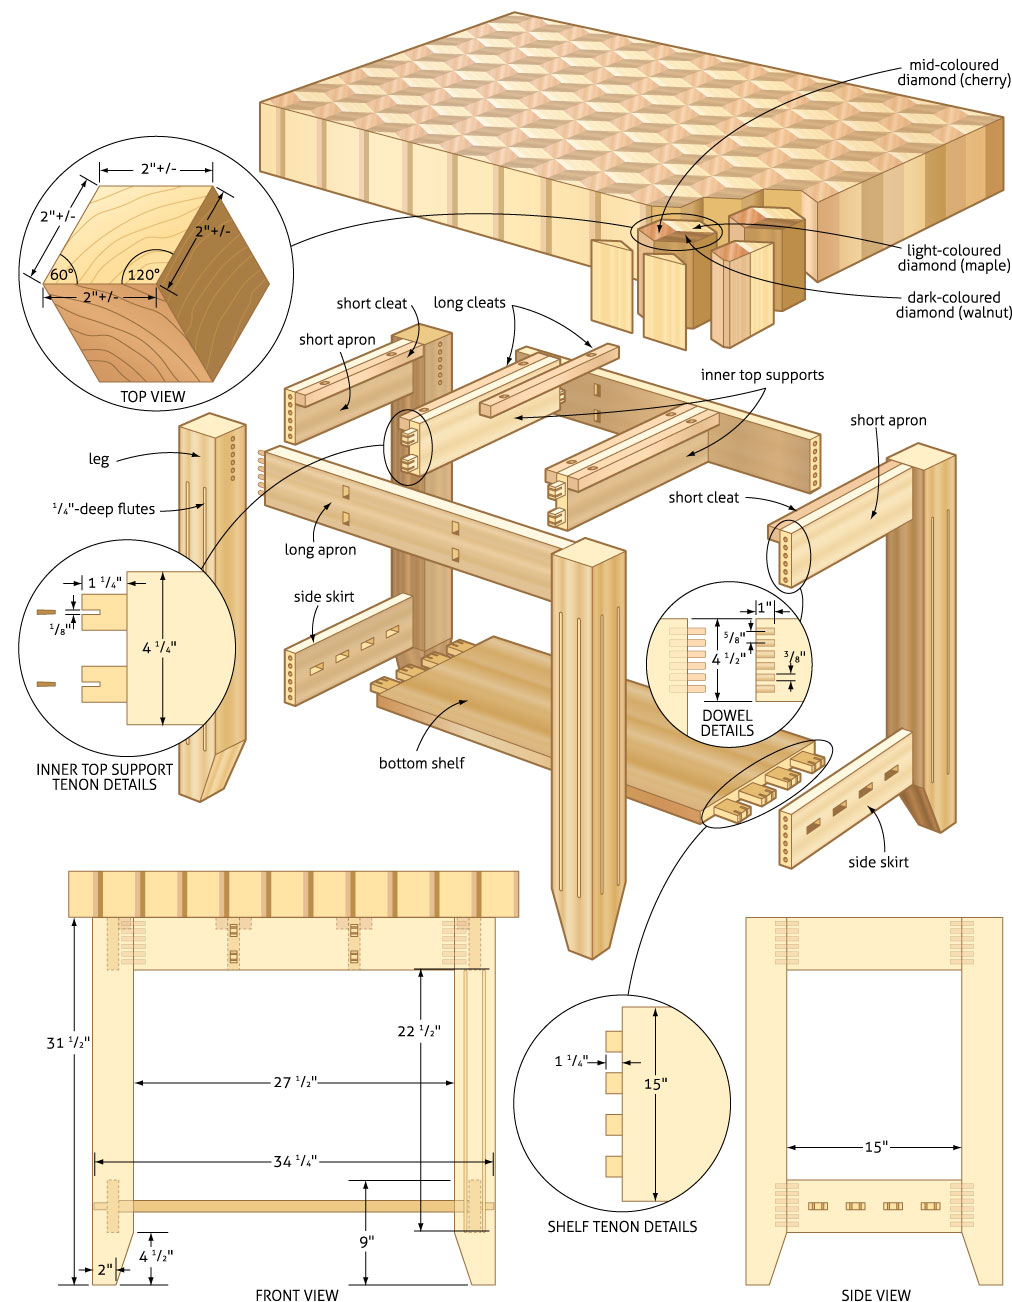 woodworking-plans-shelf-how-to-build-an-easy-diy-woodworking-projects